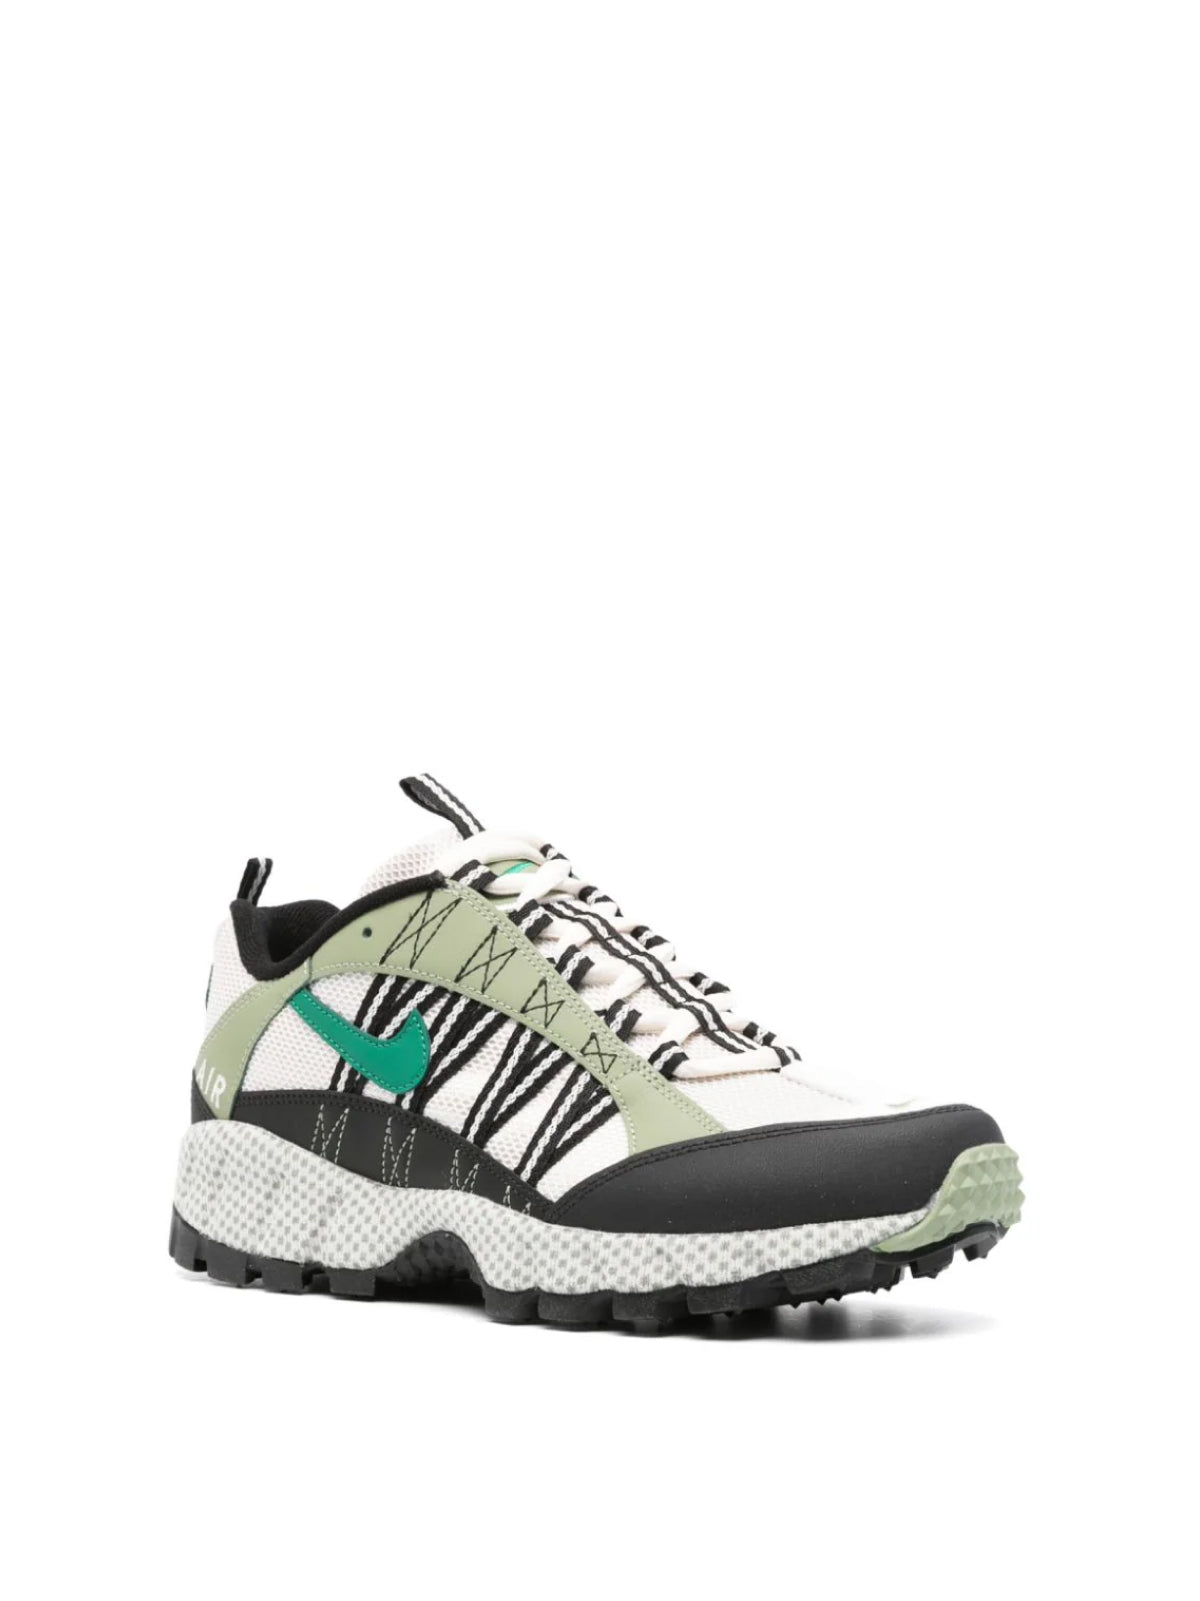 Nike-OUTLET-SALE-Air Humara QS Oil Green Sneakers-ARCHIVIST